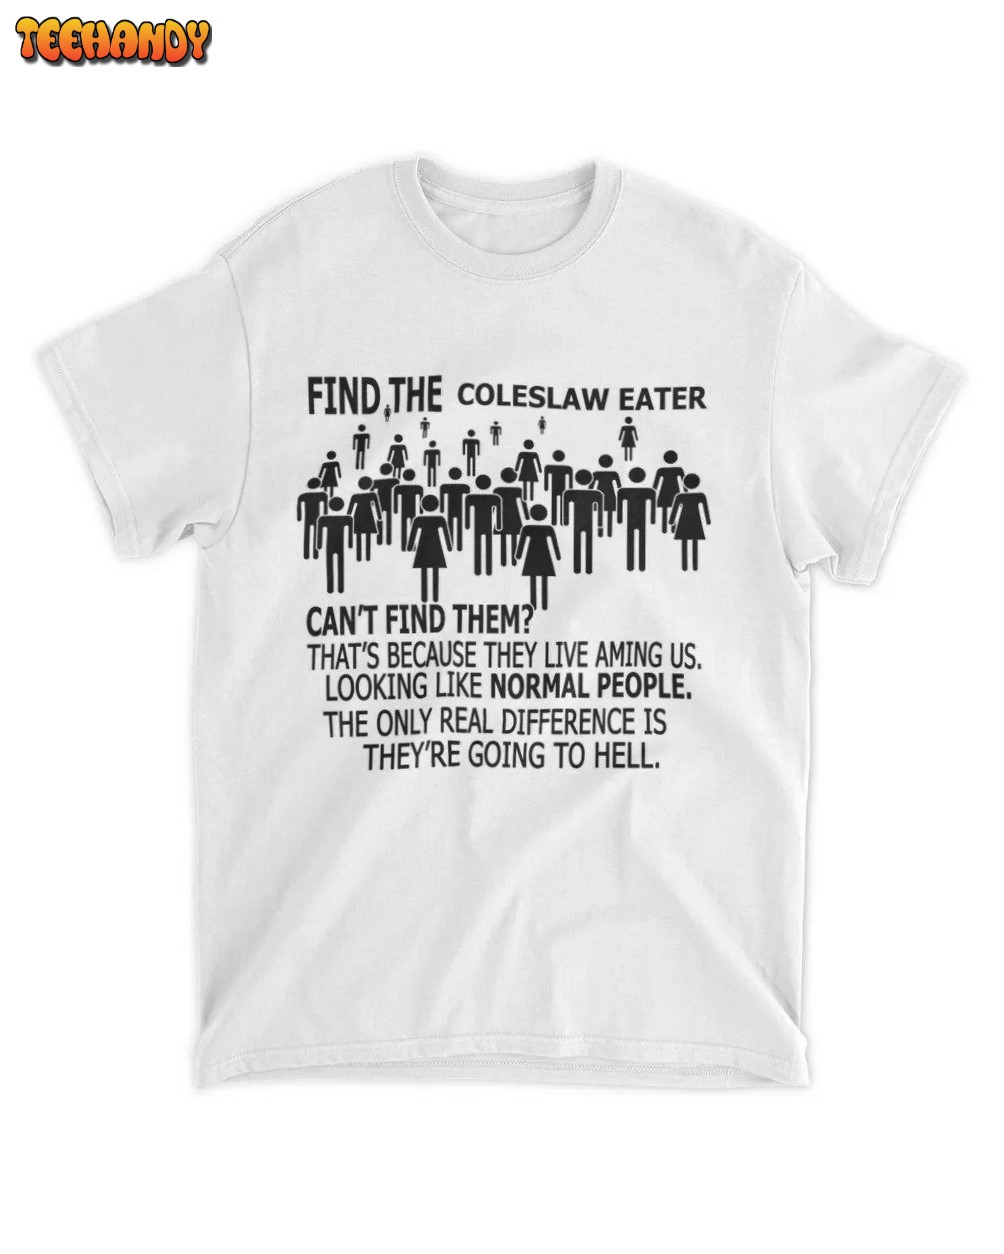 Find the Coleslaw Eater Funny Meme T-Shirt, Funny Meme Quote Oddly Specific Shirt